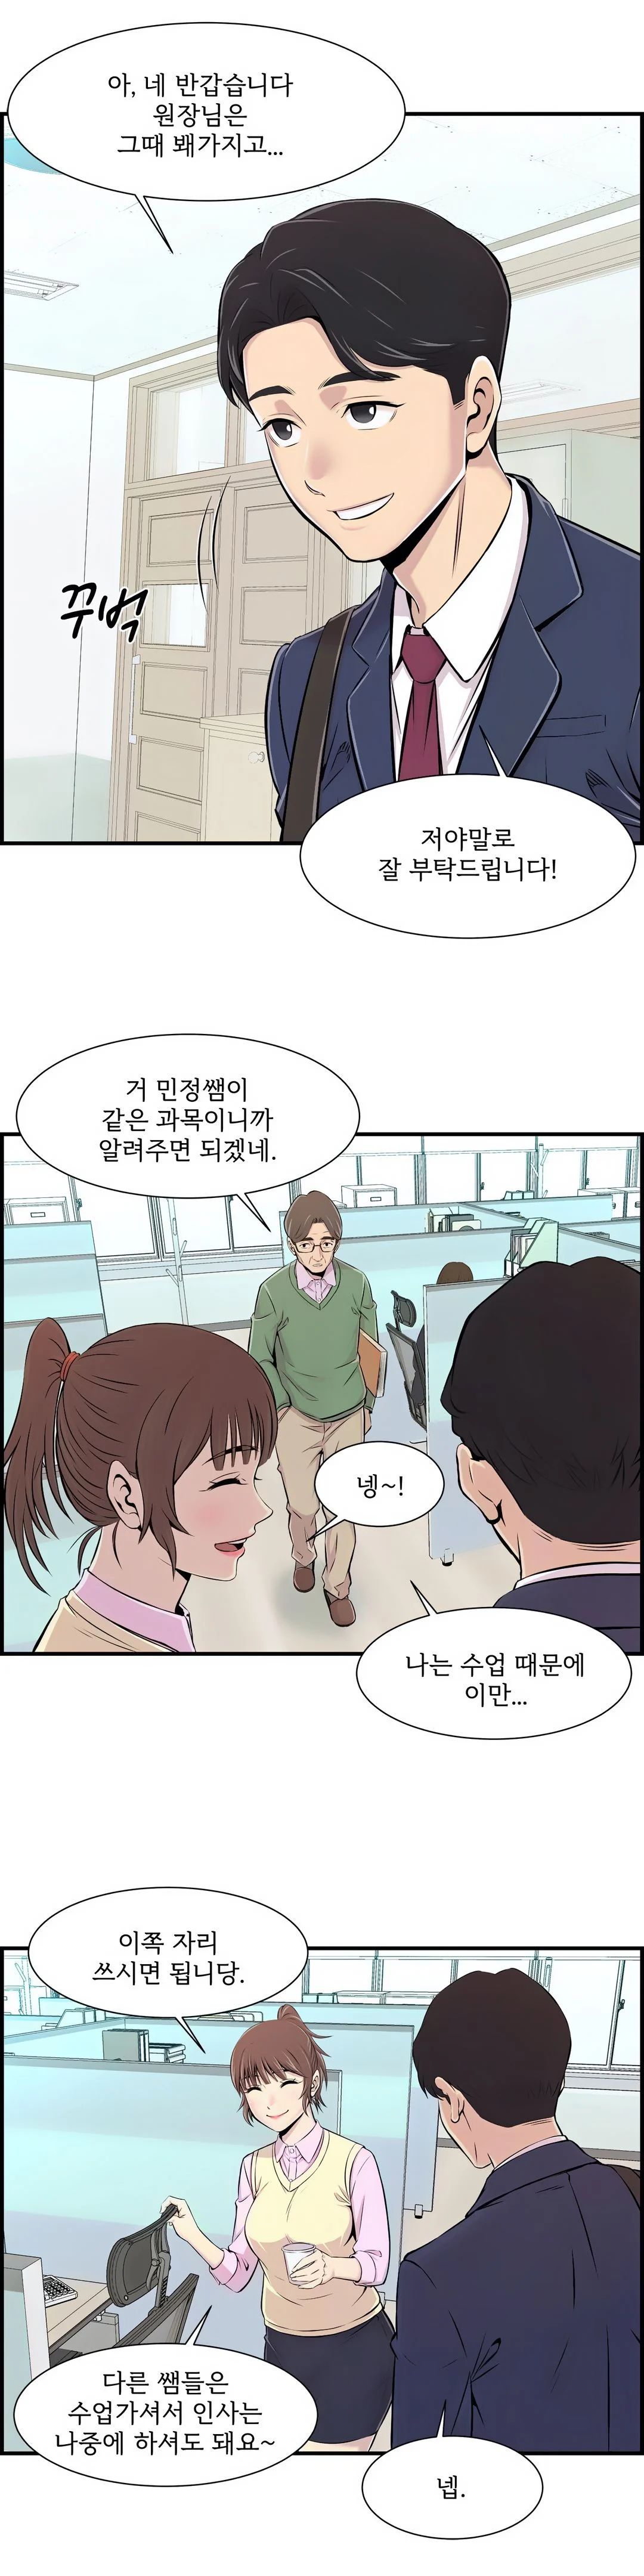 Cram School Scandal Raw - Chapter 1 Page 21